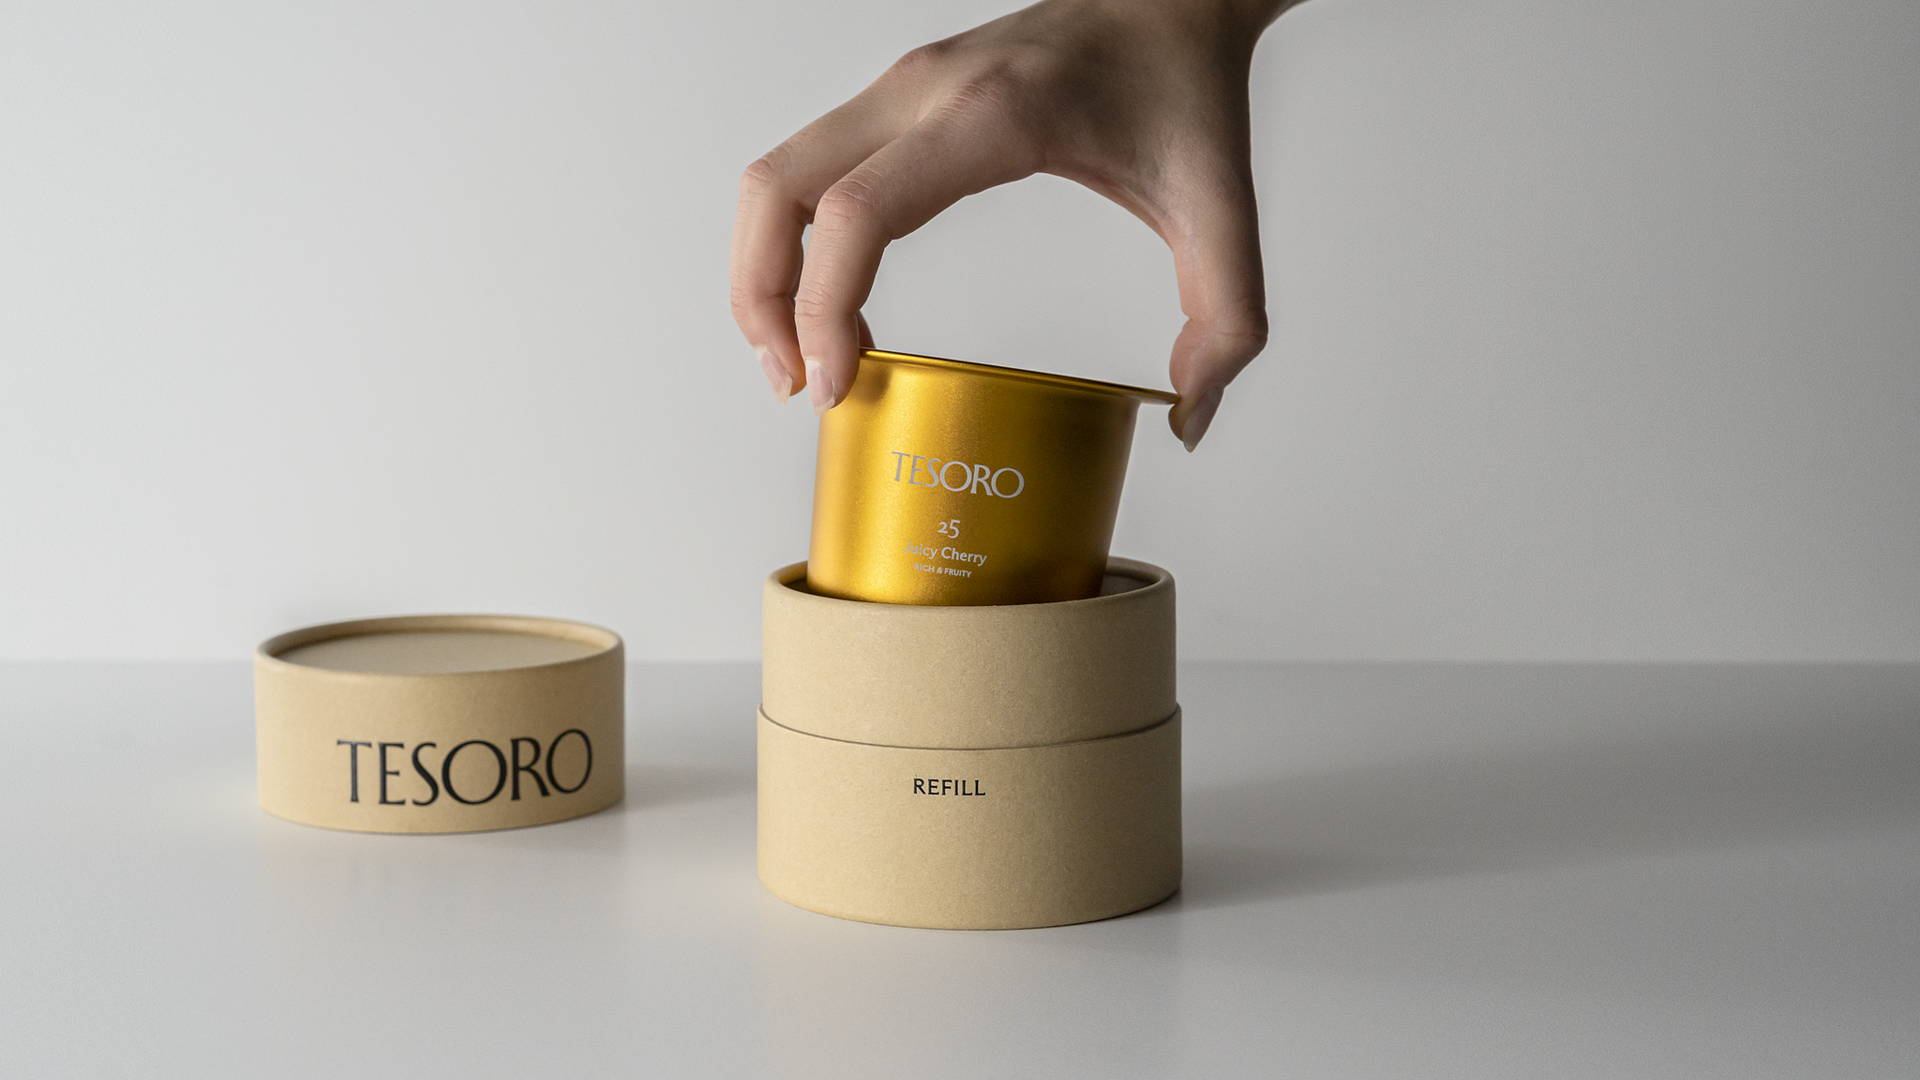 Featured image for Blond and Tesoro Tackle Unnecessary Waste With Sustainably Focused Aroma Candles